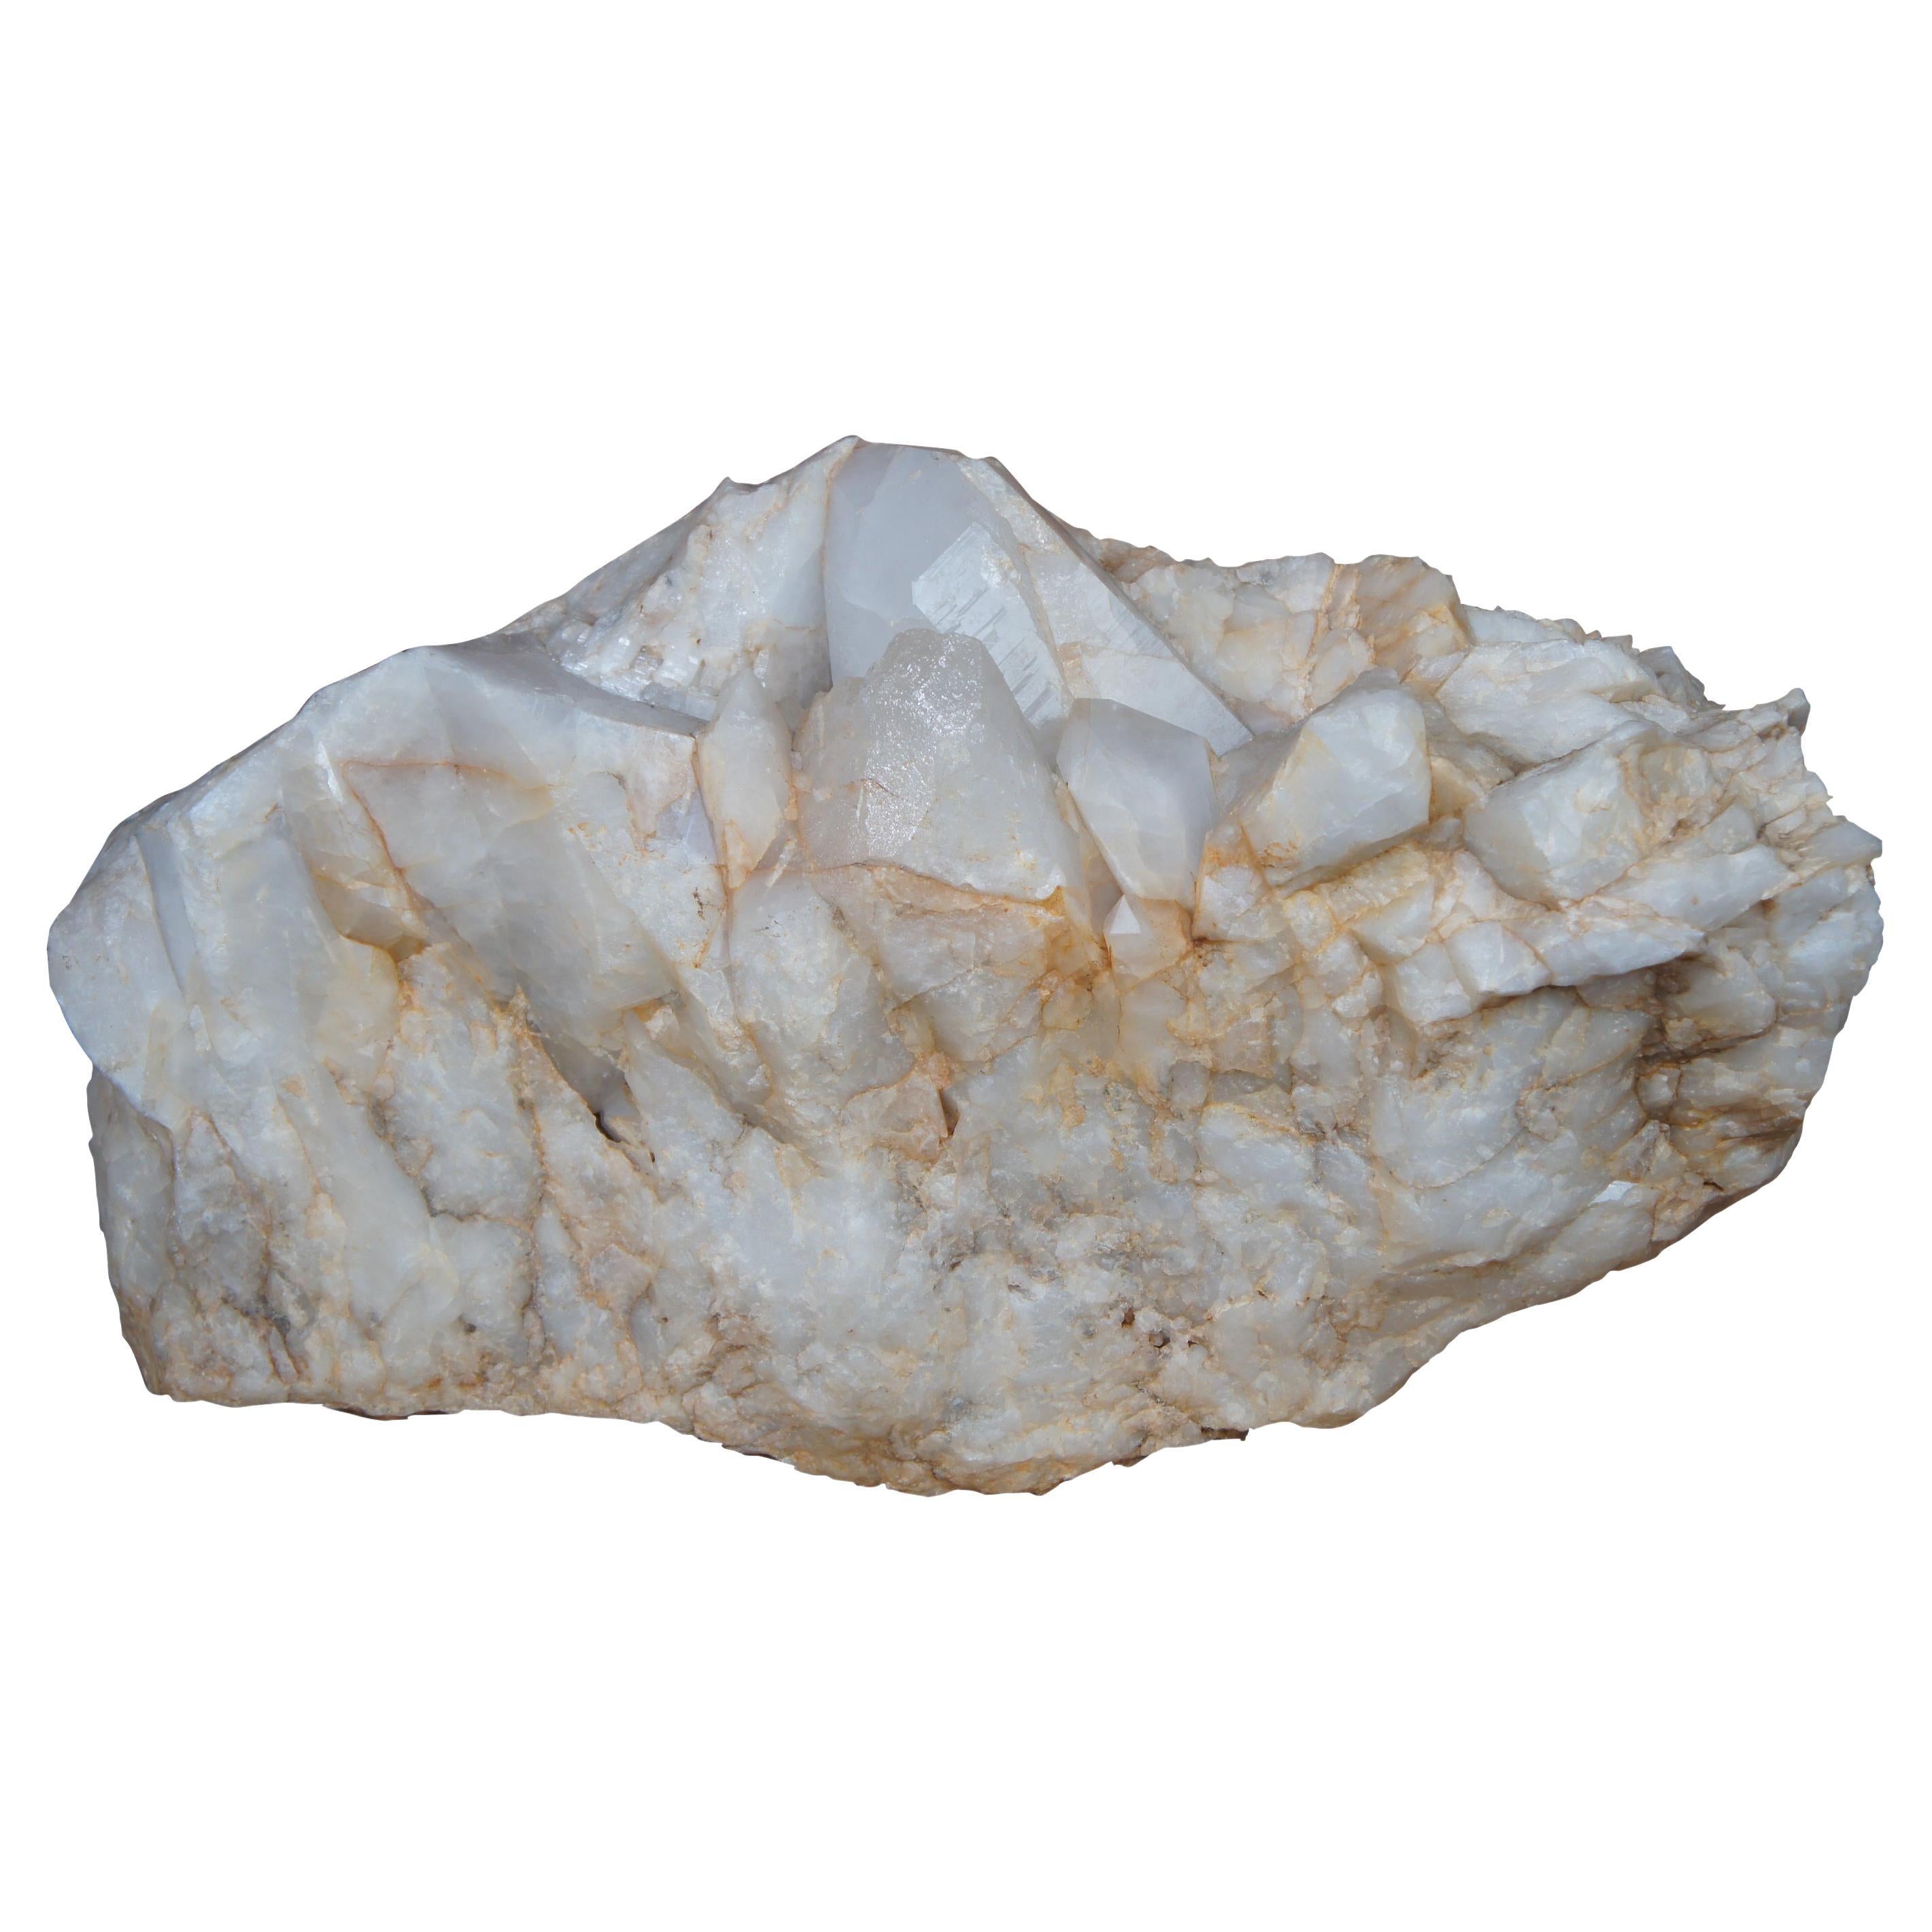 90lb Natural White Quartz Crystal Rock Stone Formation Heal Stone Healing Cluster